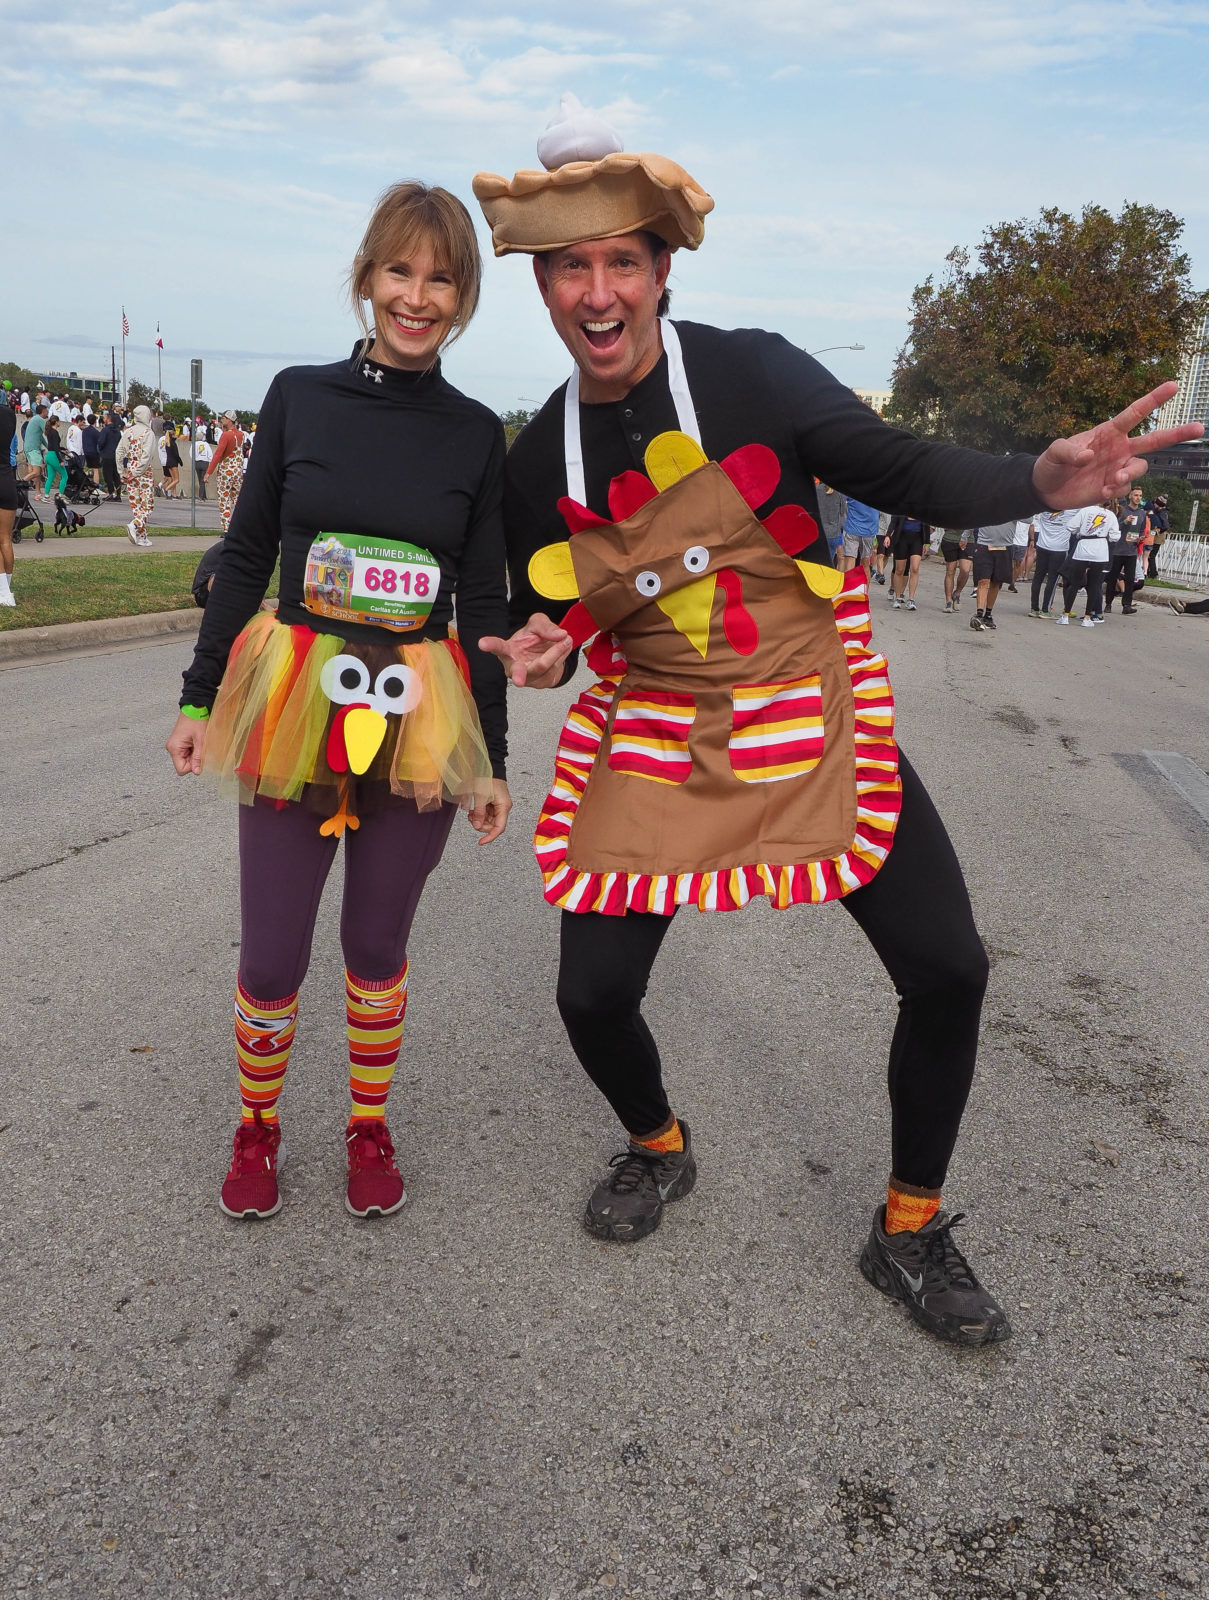 Thundercloud Subs Turkey Trot runners